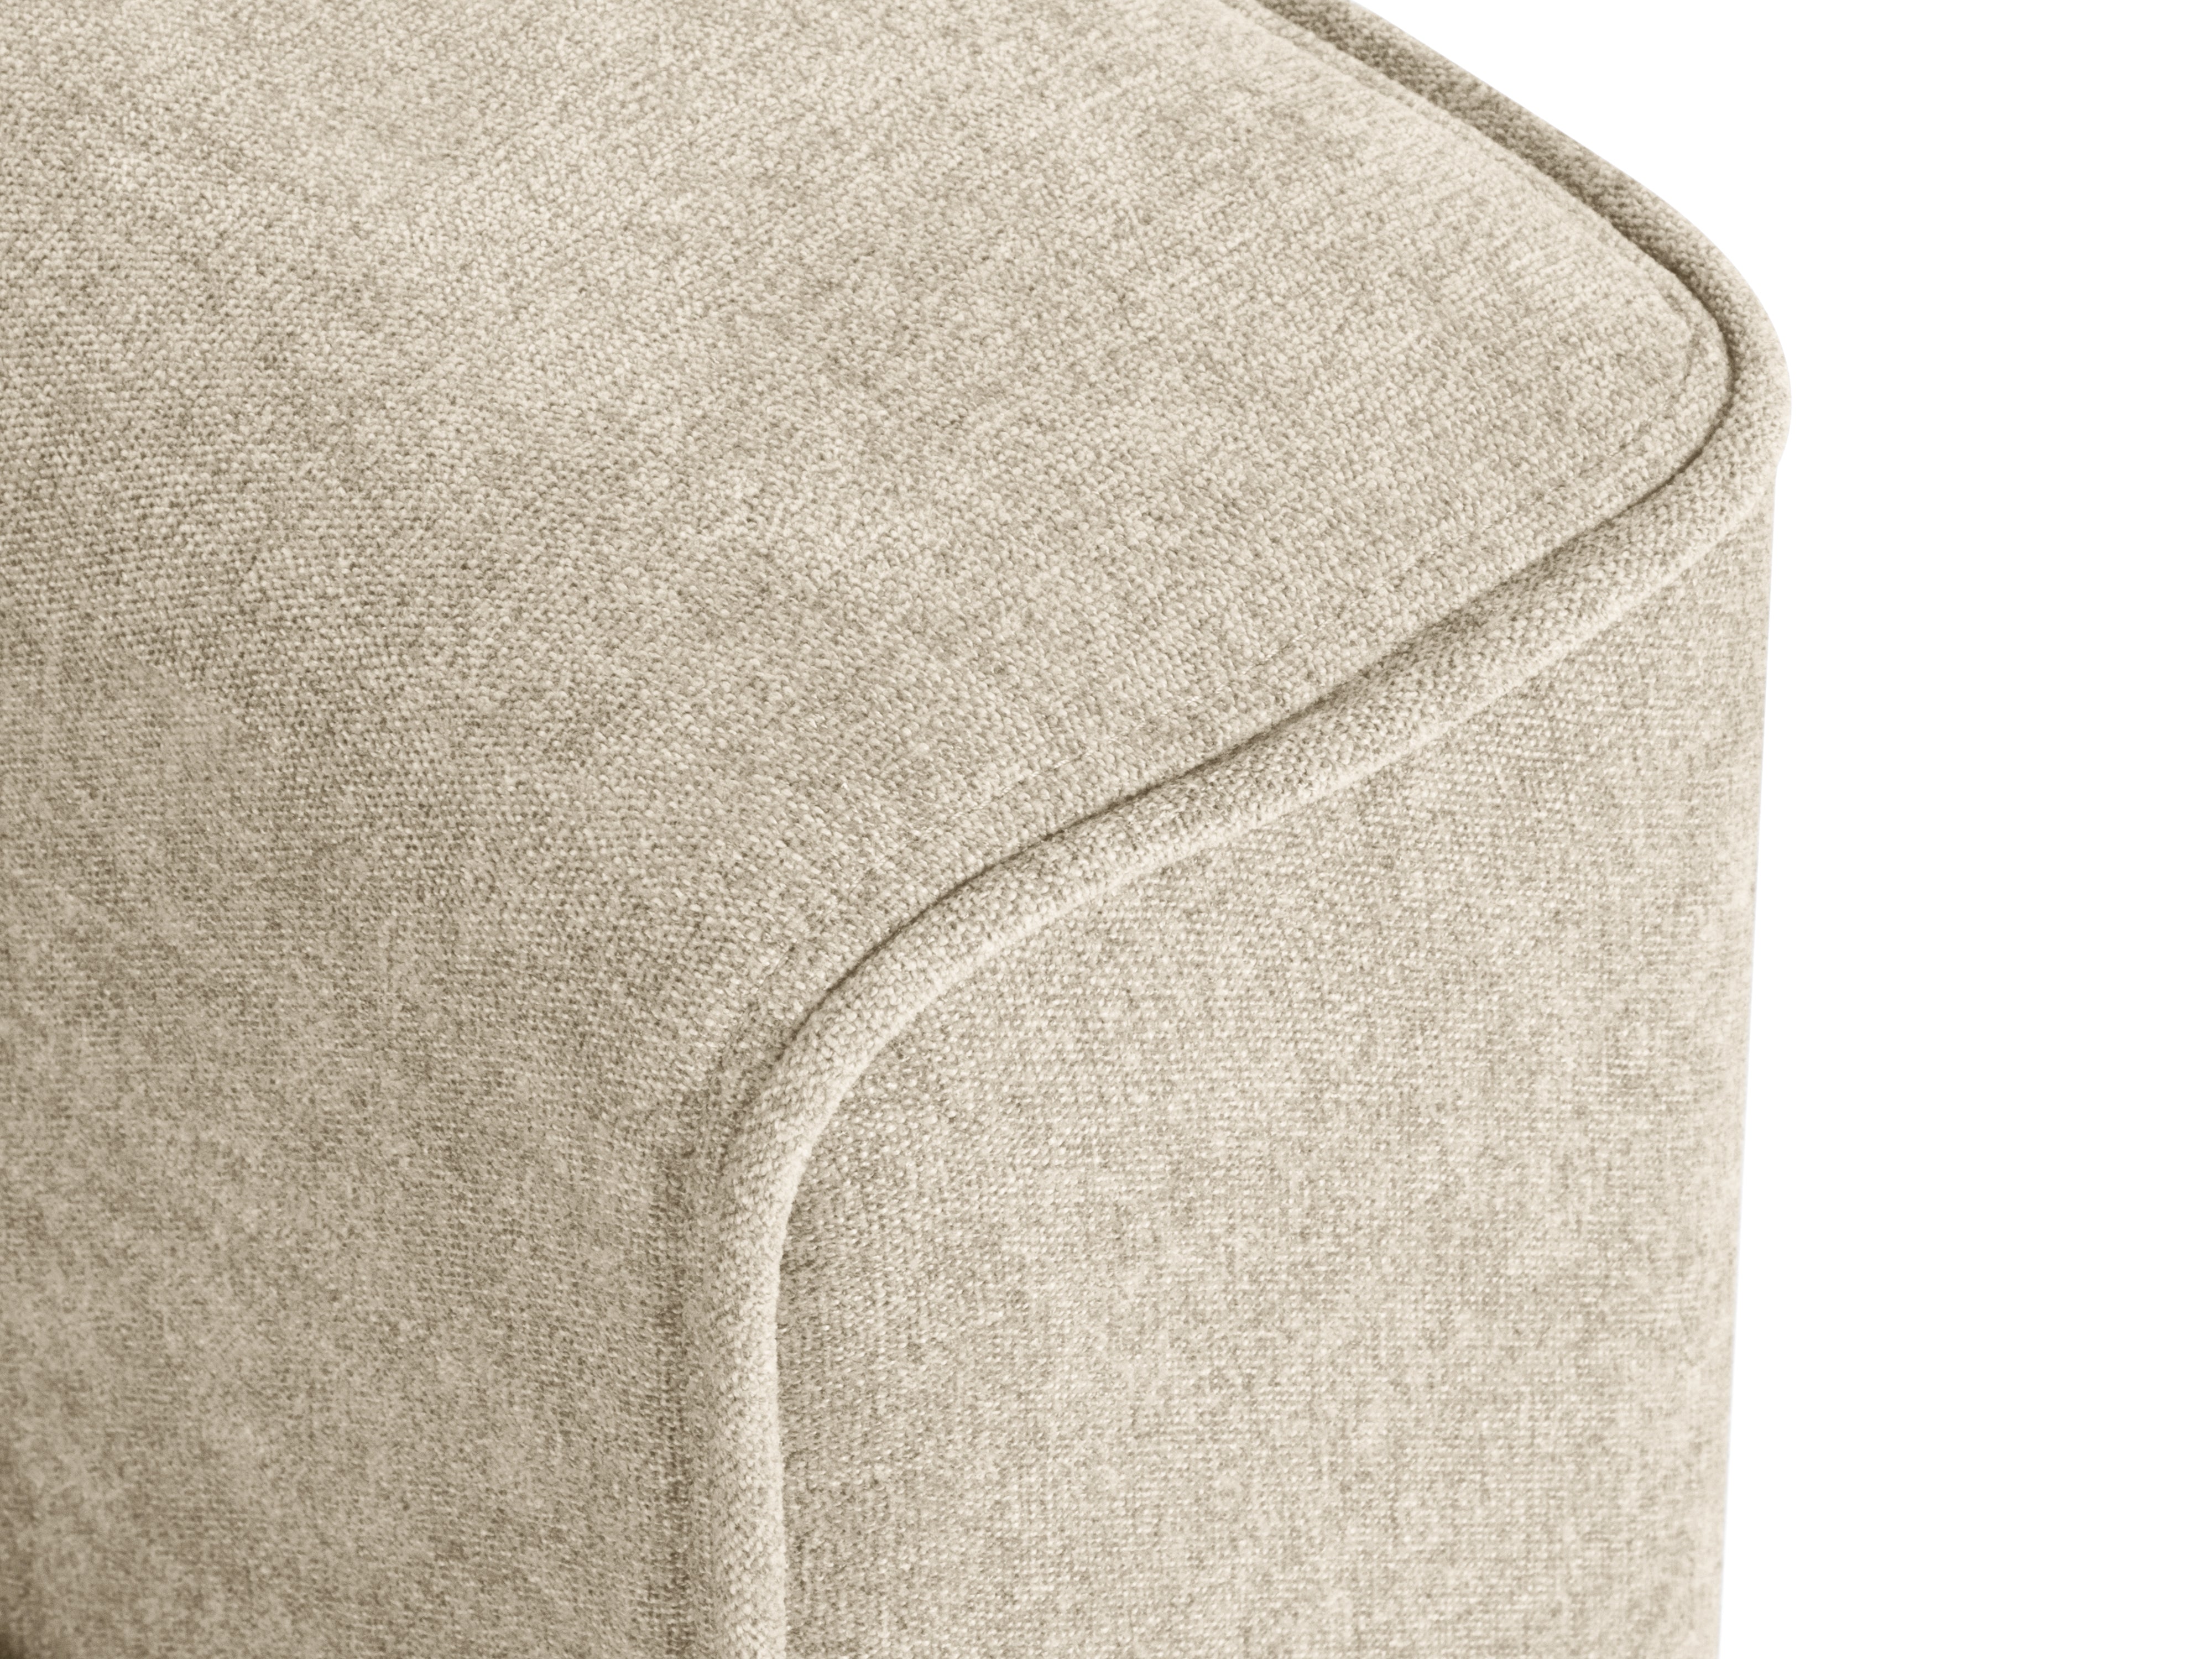 Structural fabric armrests